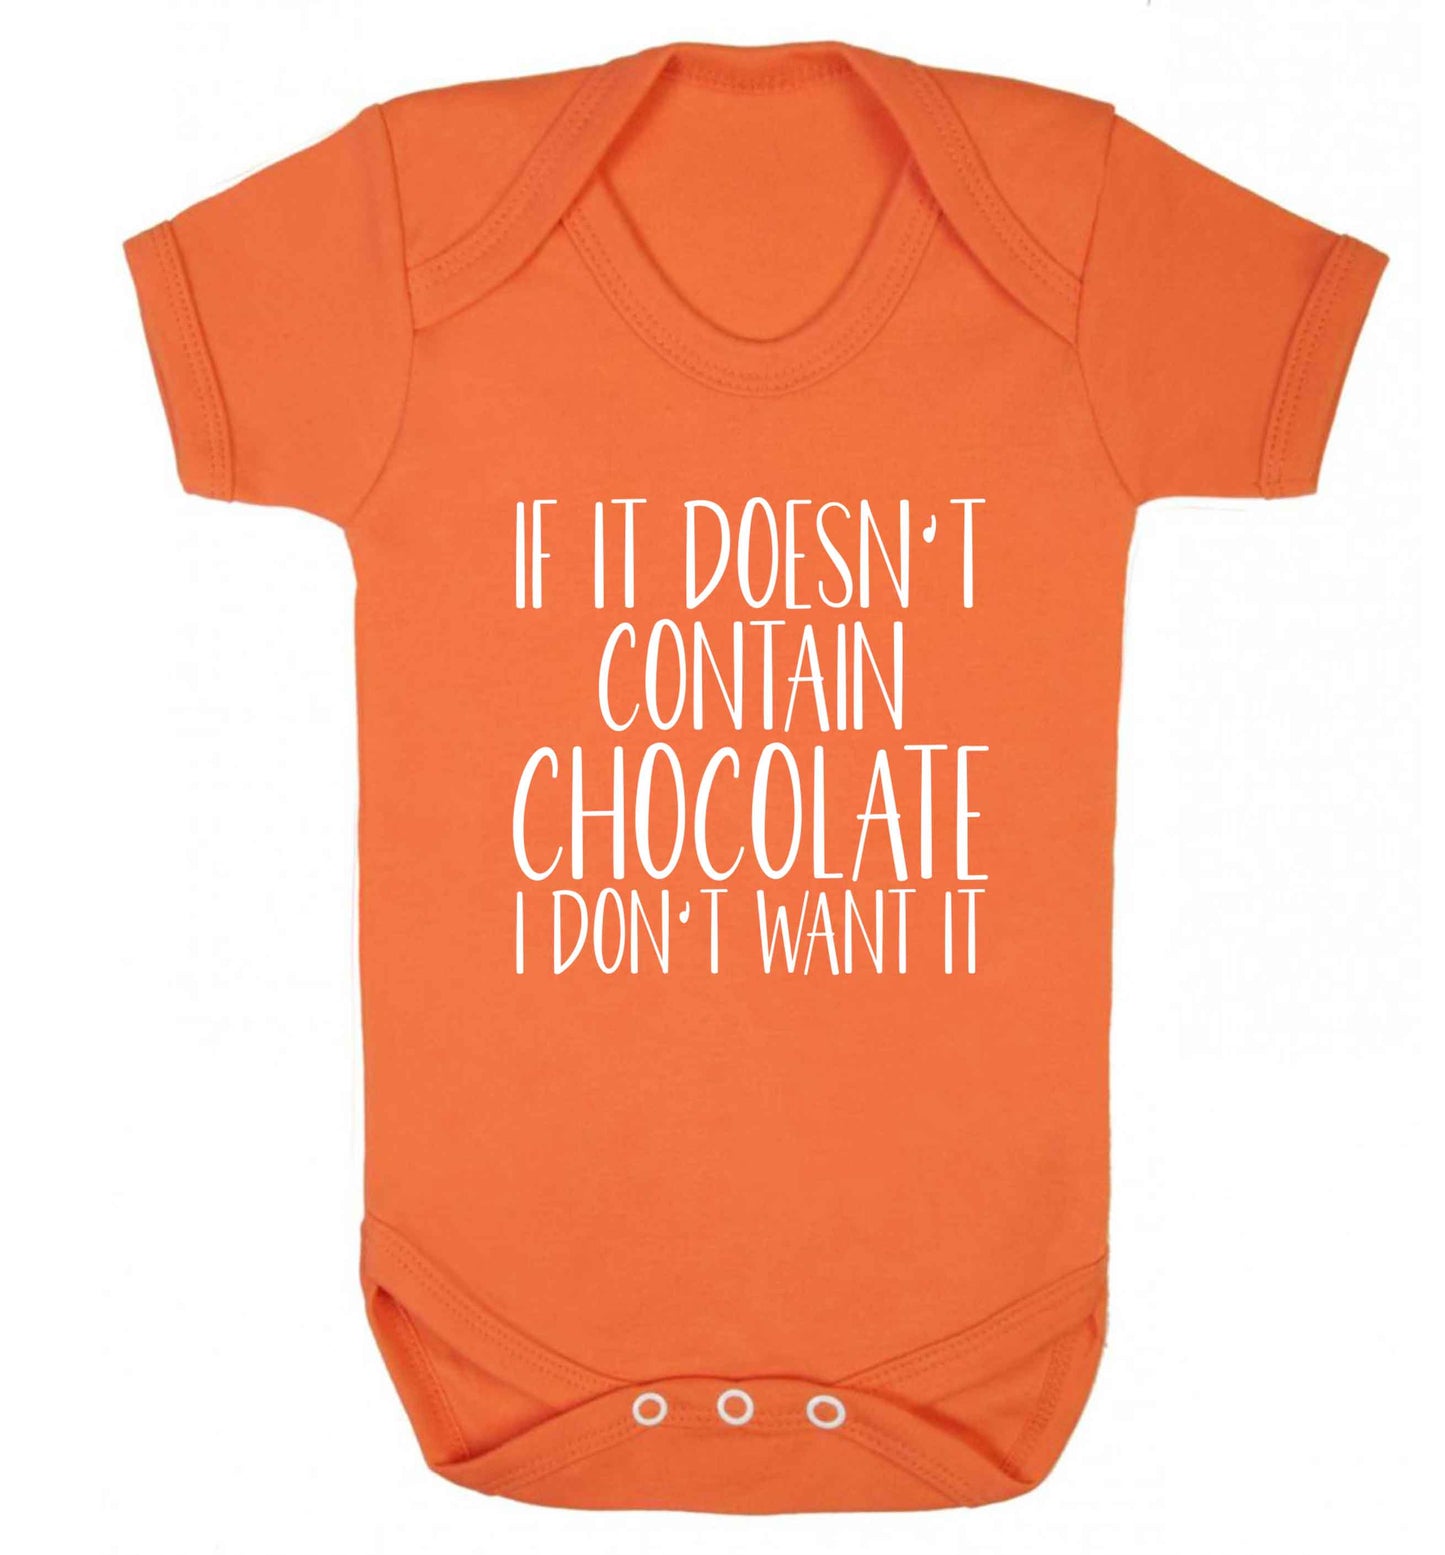 If it doesn't contain chocolate I don't want it baby vest orange 18-24 months